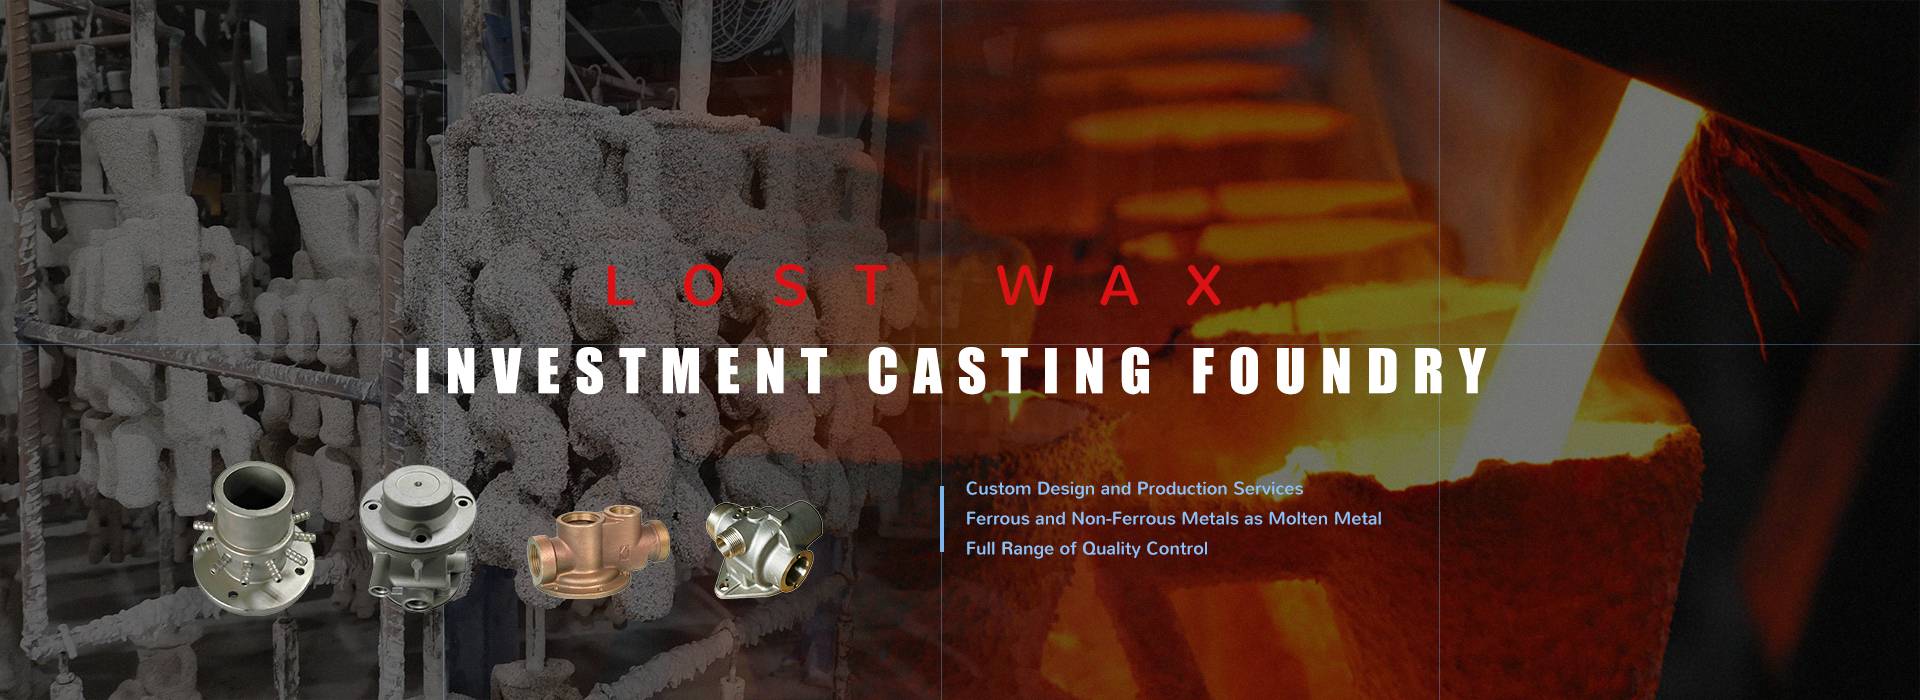 lost wax investment casting foundry